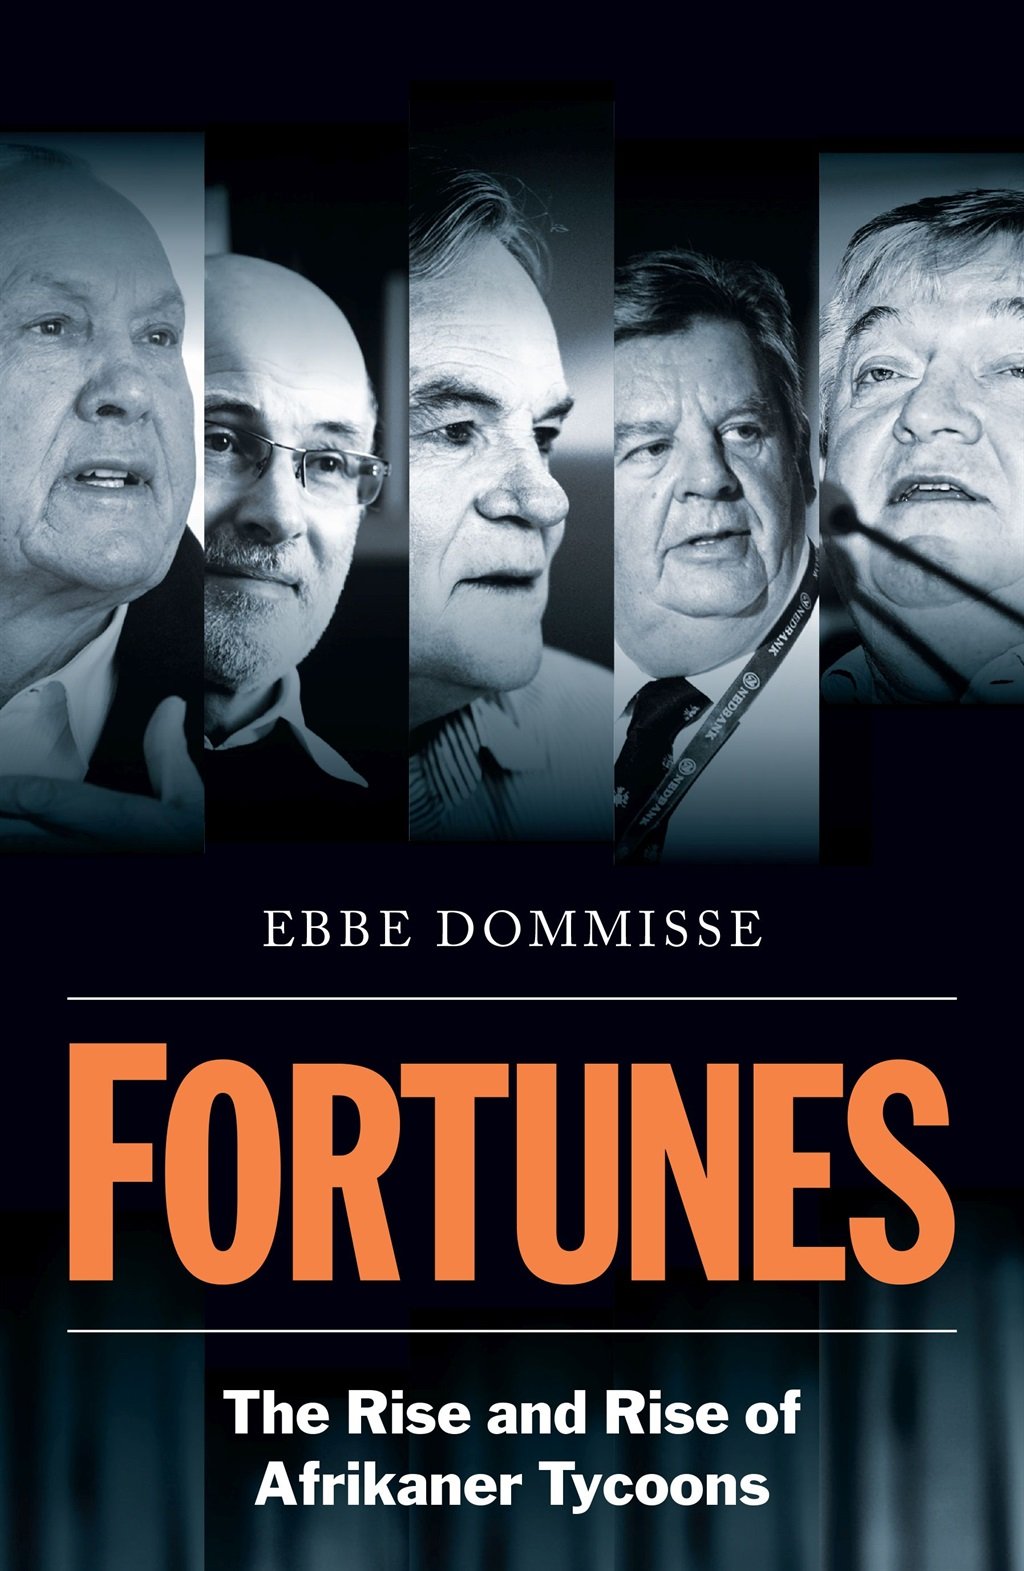 The cover of 'Fortunes' (Supplied)